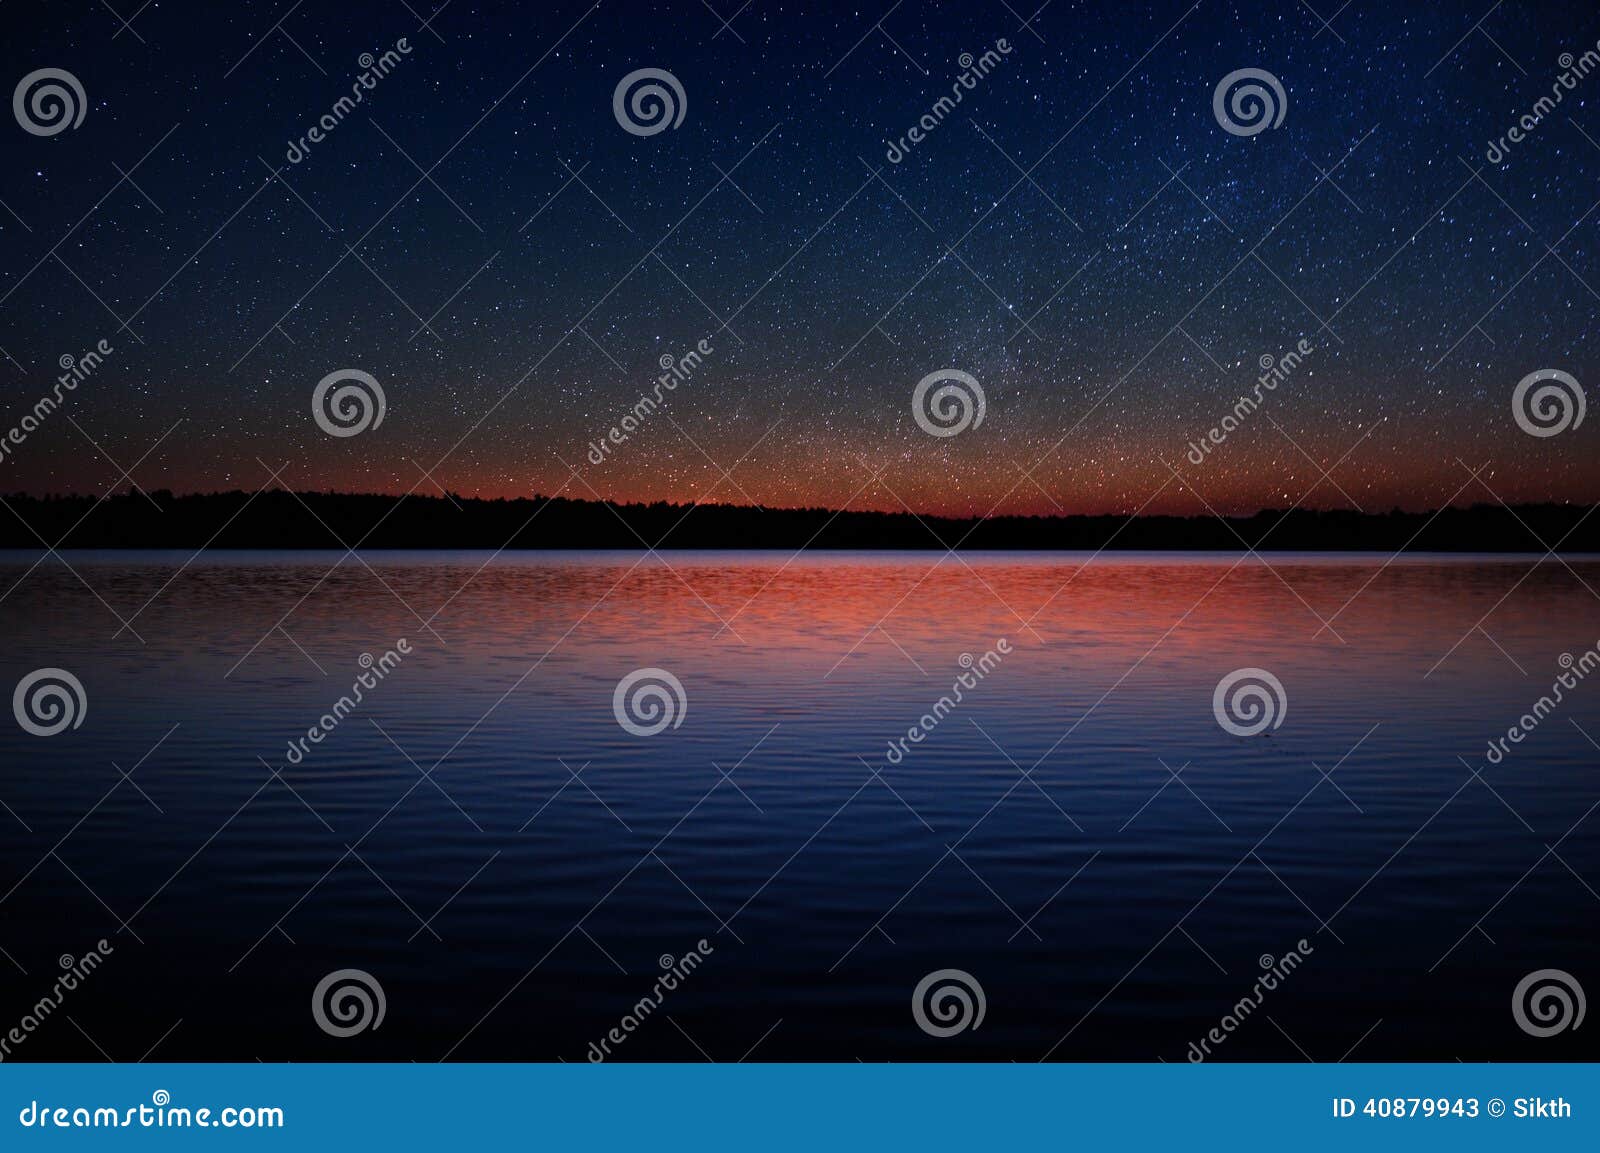 sunset over calm lake with real stars in dark sky